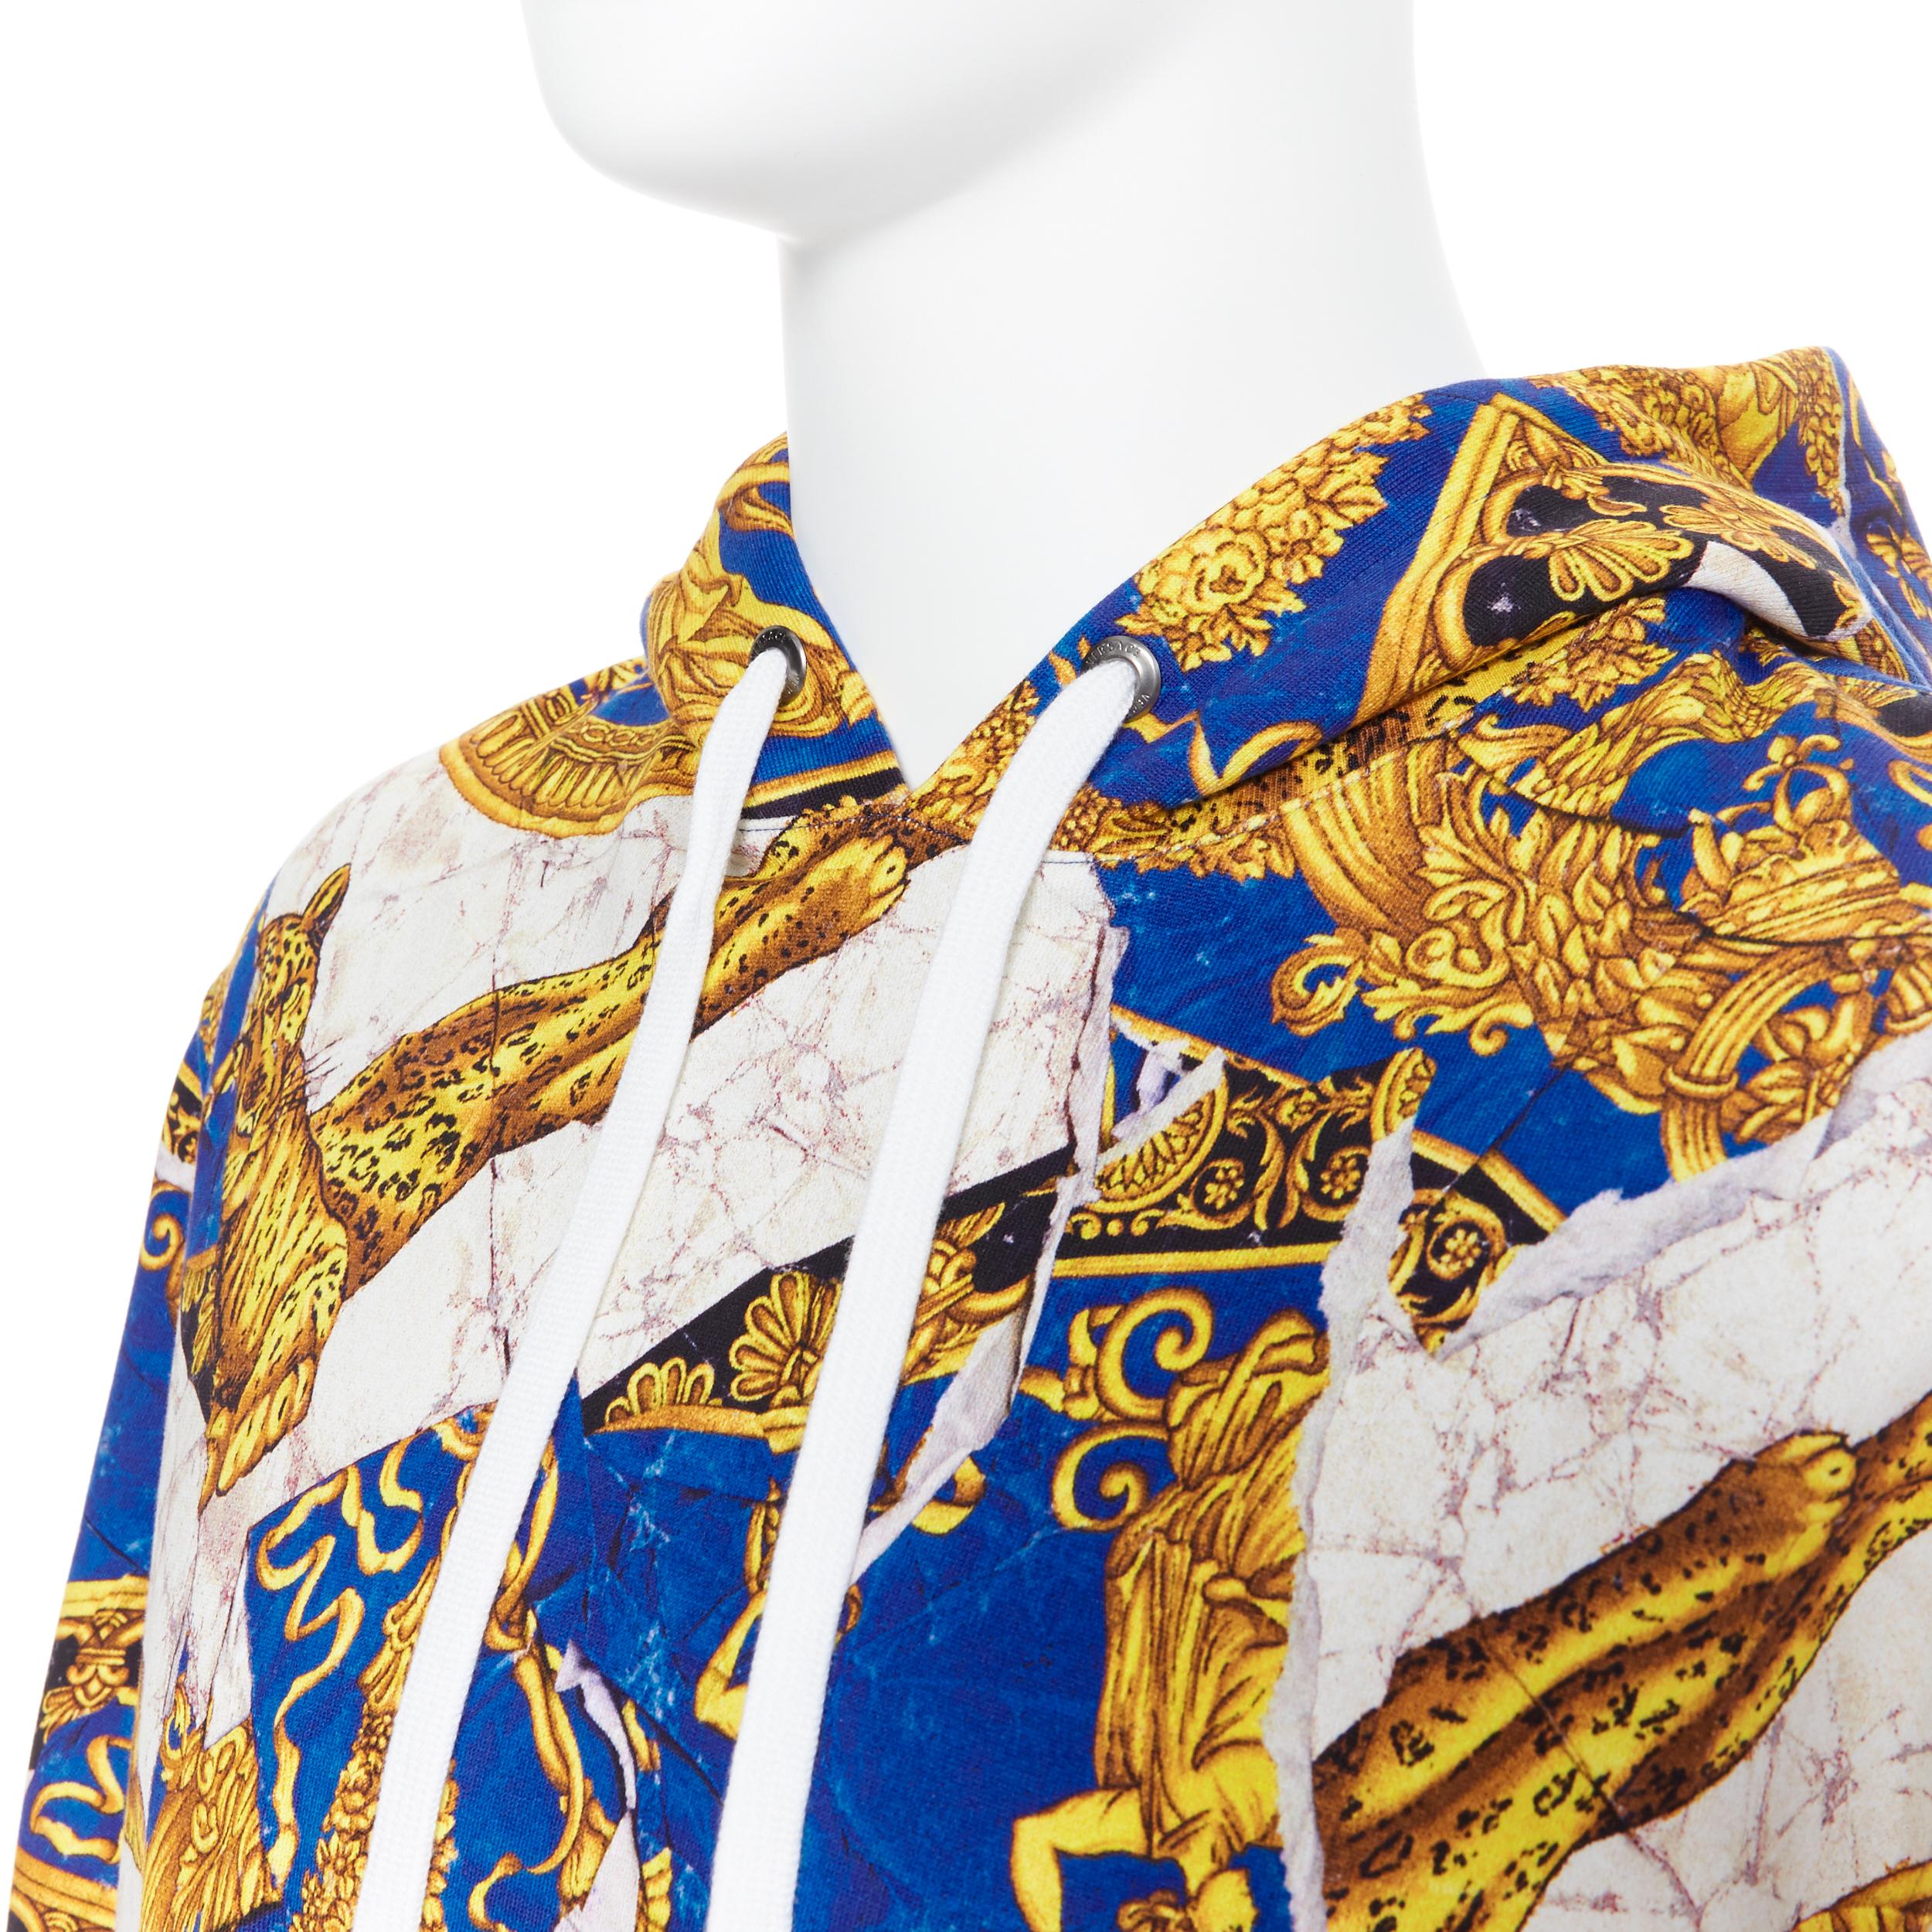 new VERSACE Runway gold blue leopard baroque  marble  print hoodie pullover XXXL
Brand: Versace
Designer: Donatella Versace
Model Name / Style: Hoodie
Material: Cotton
Color: Blue; gold
Pattern: Other; baroque mixed print
Extra Detail: Long